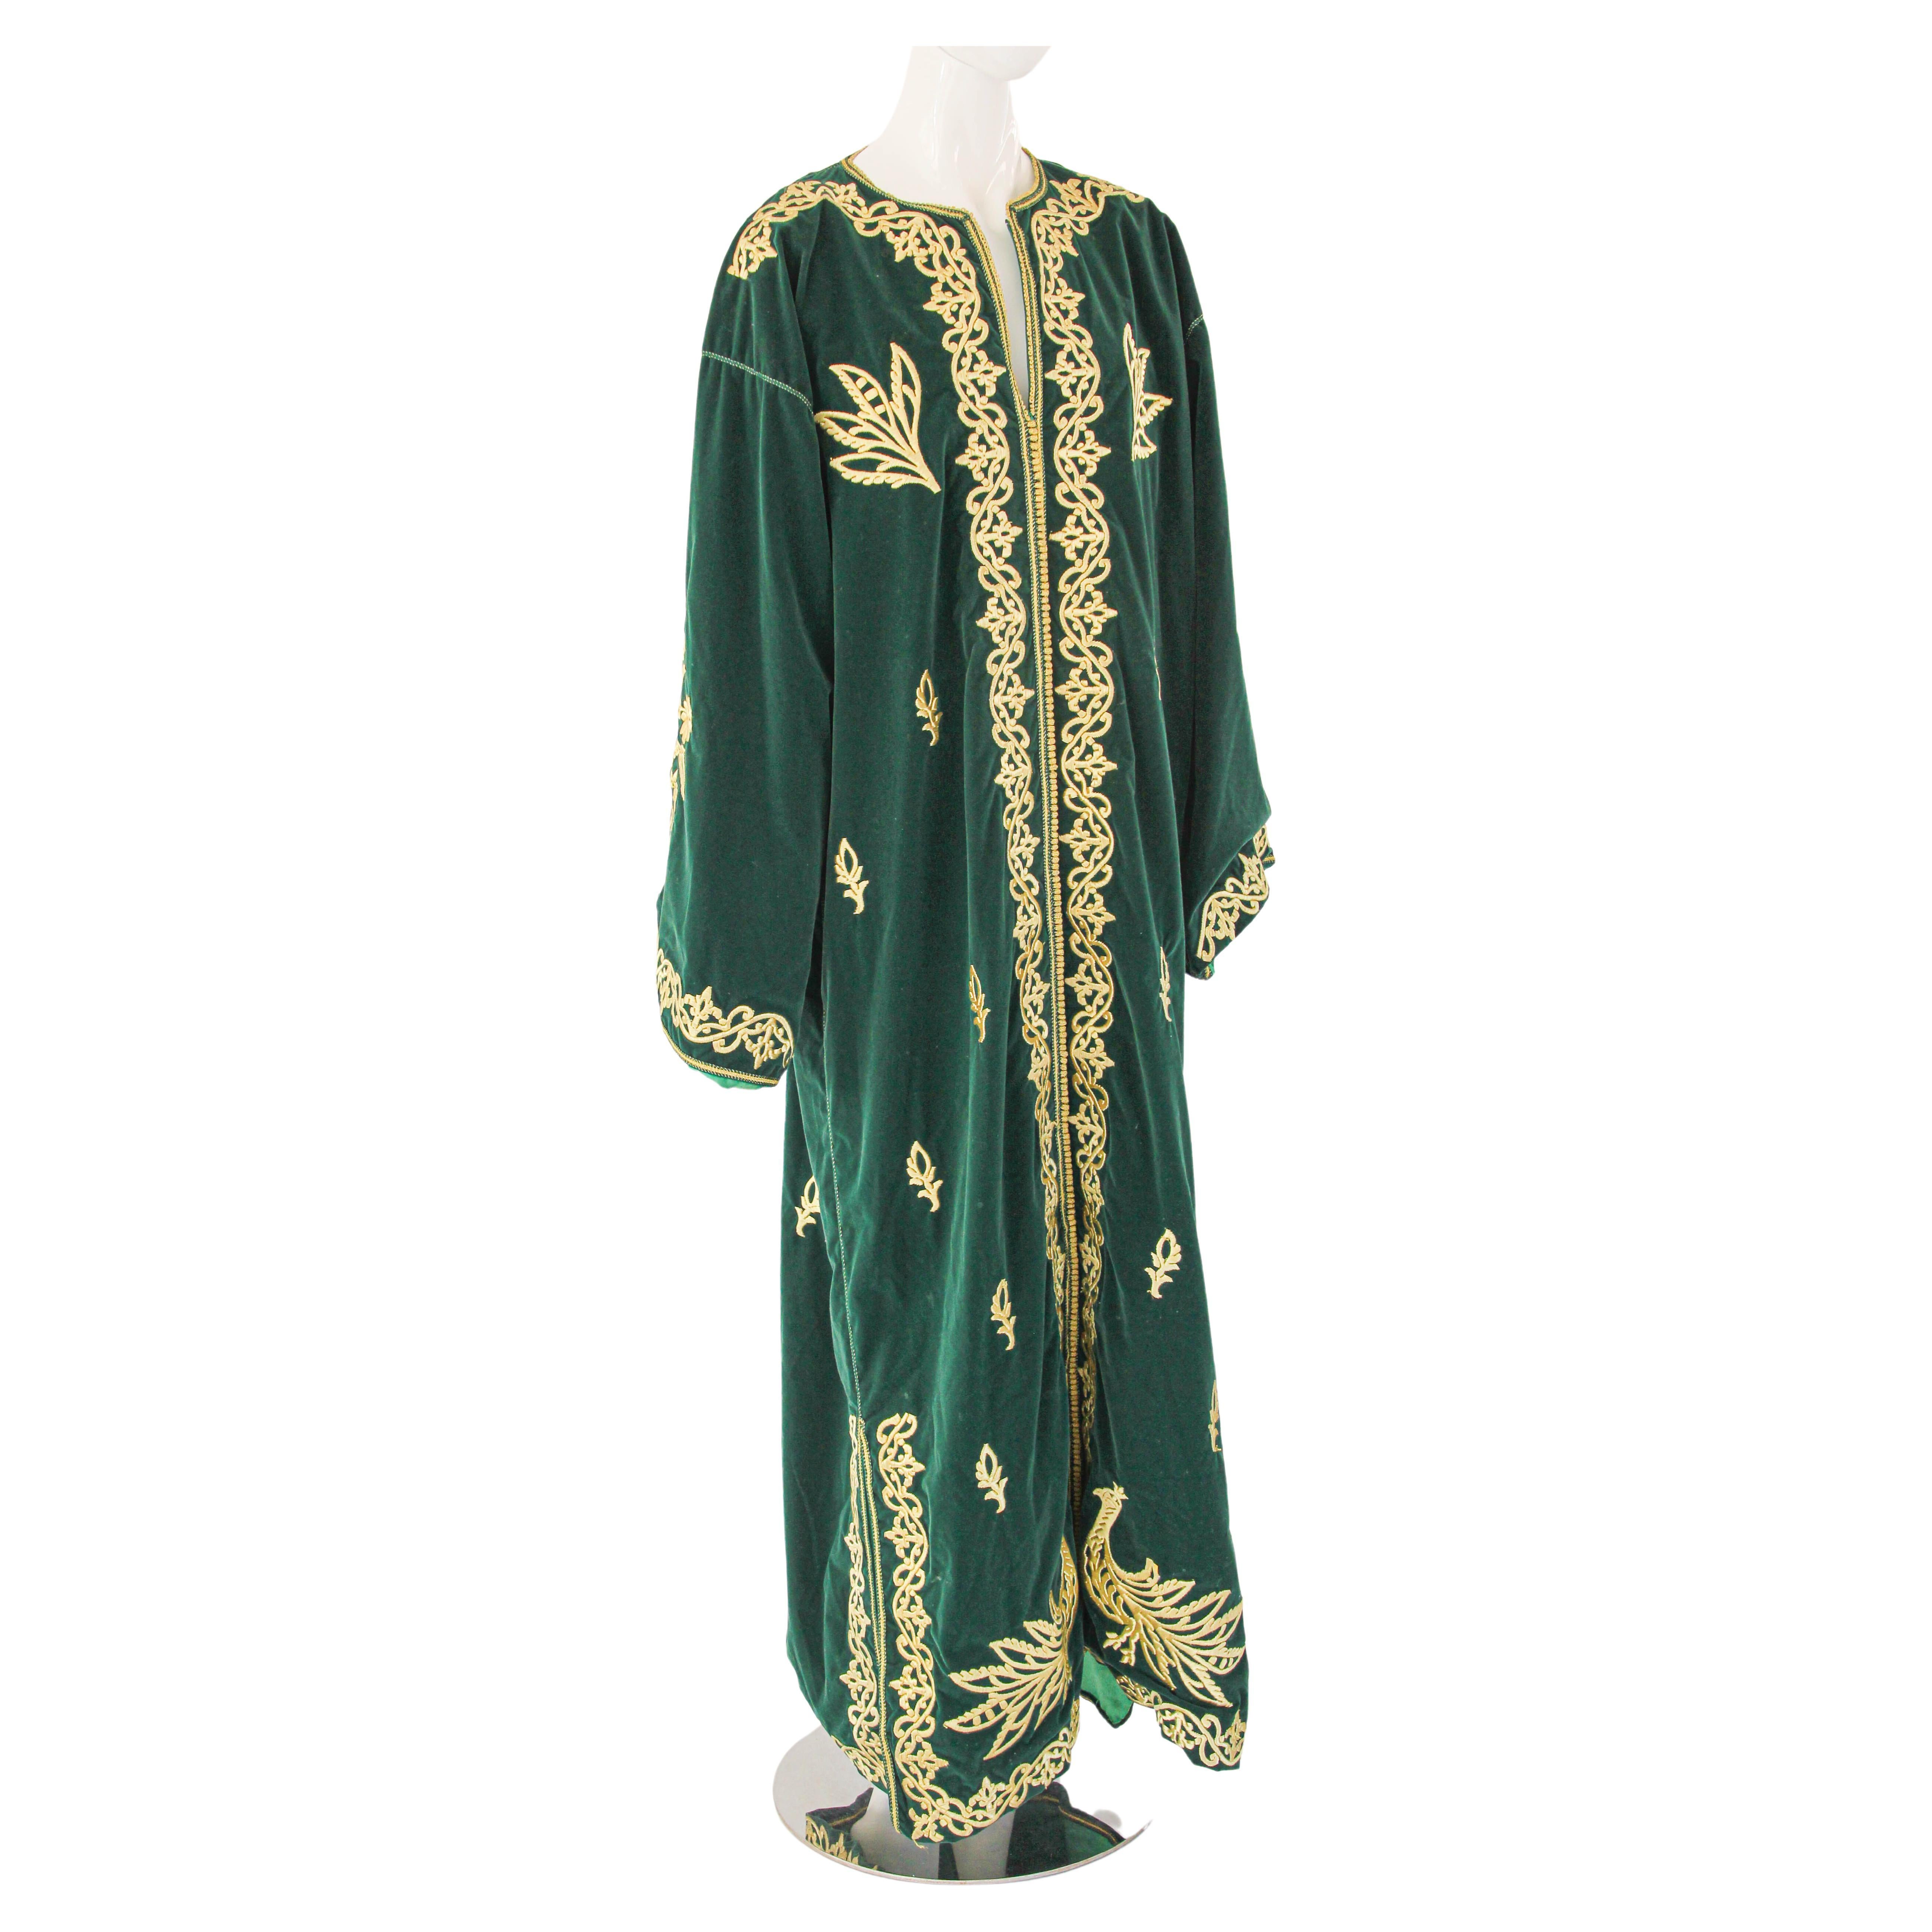 1960s Vintage Moroccan Velvet Caftan Emerald Green and Gold Thread. Size XXL.
This long maxi dress velvet caftan is embroidered and embellished entirely by hand, satin lined.
One of a kind evening Moroccan Middle Eastern gown.
The velvet vintage